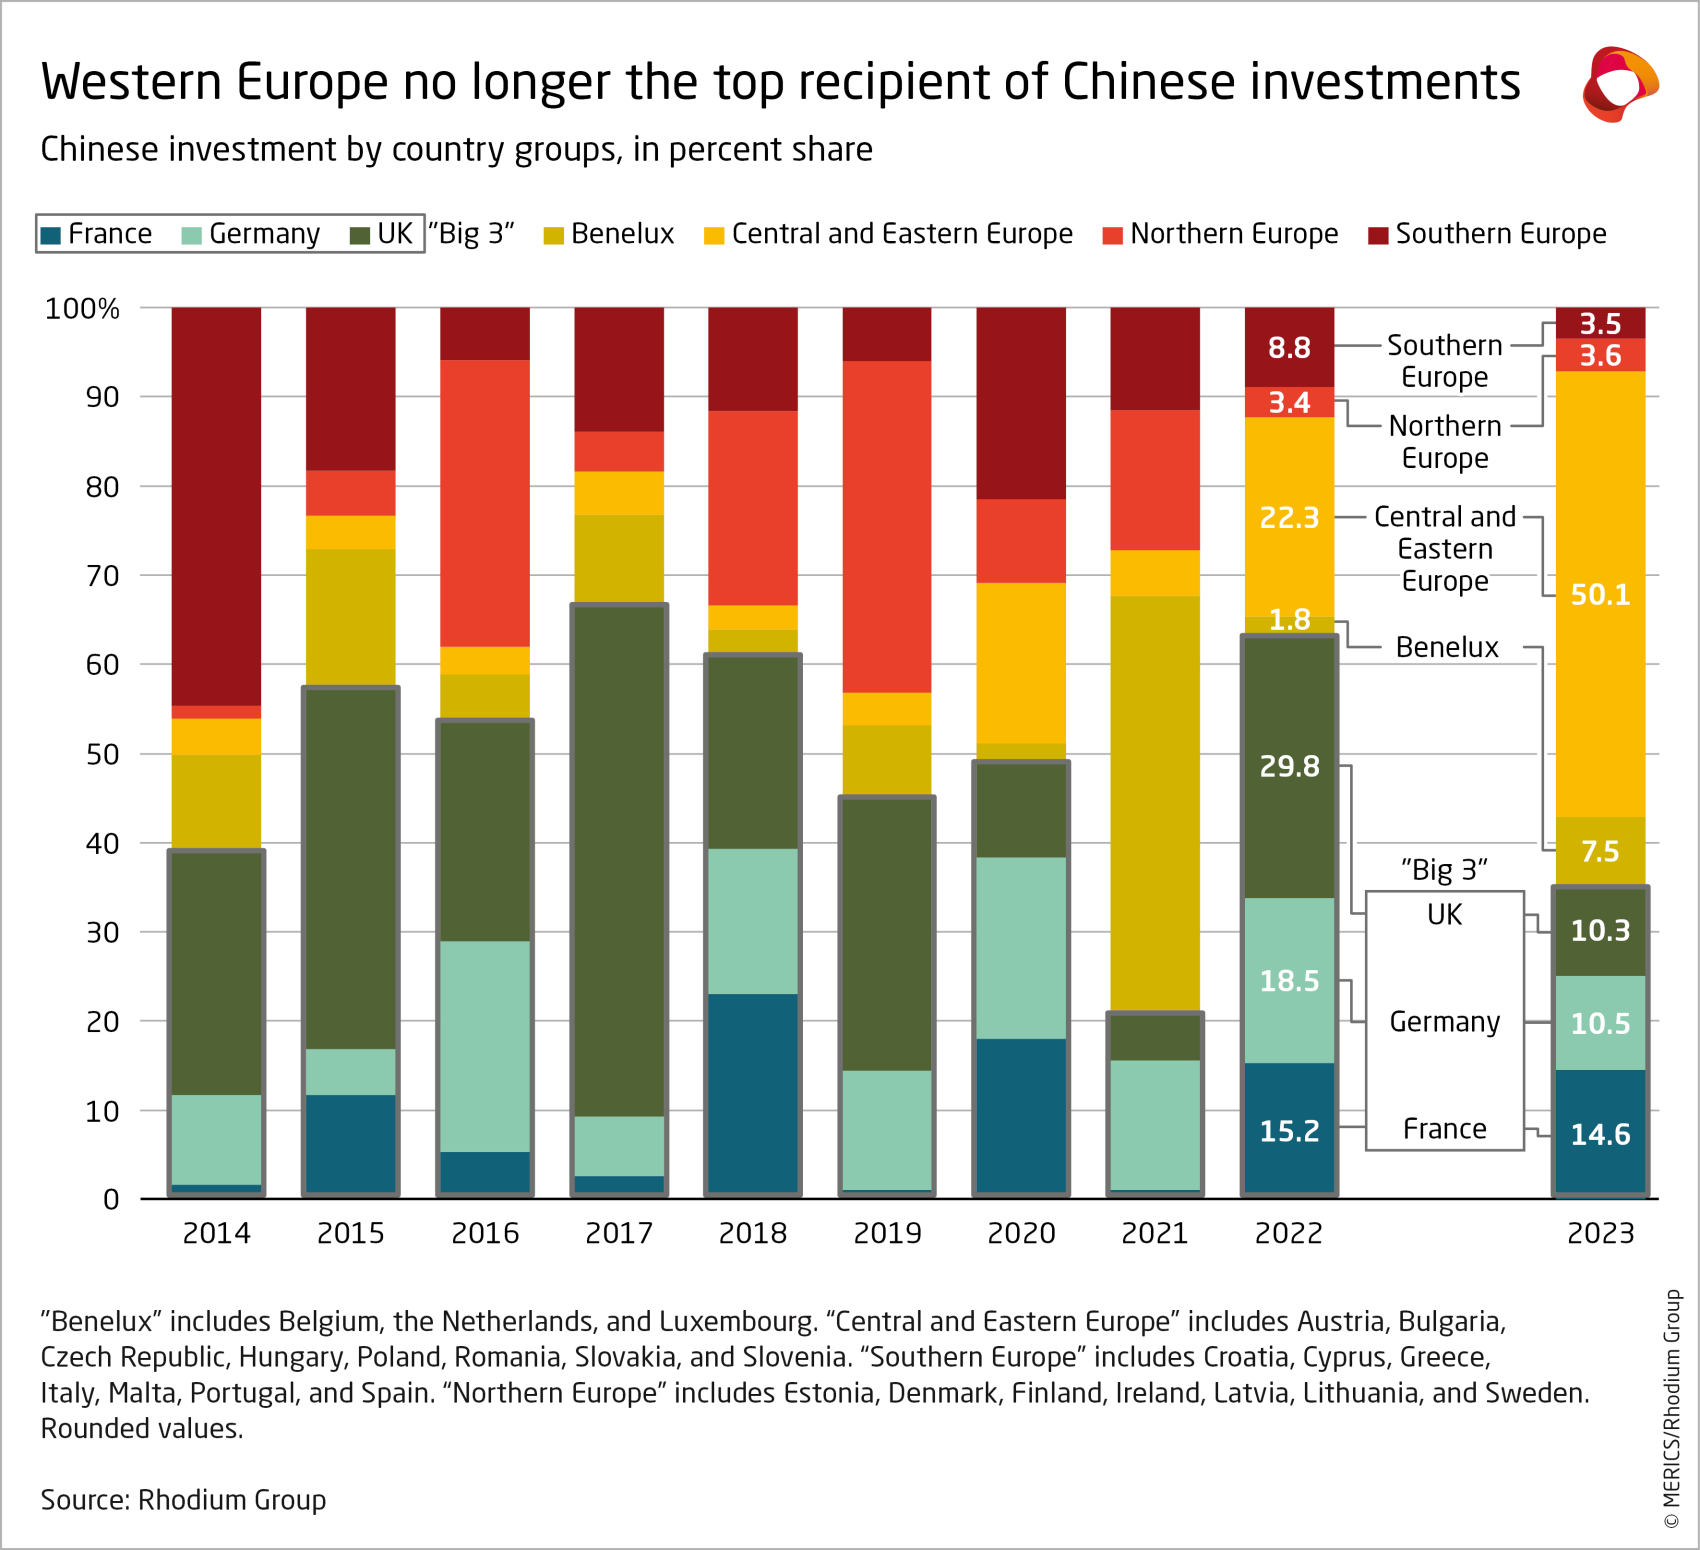 merics-rhodium-group-chinese-fdi-in-europe-2023-western-europe-no-longer-top-recipient-of-chinese-investments-annex-2.png